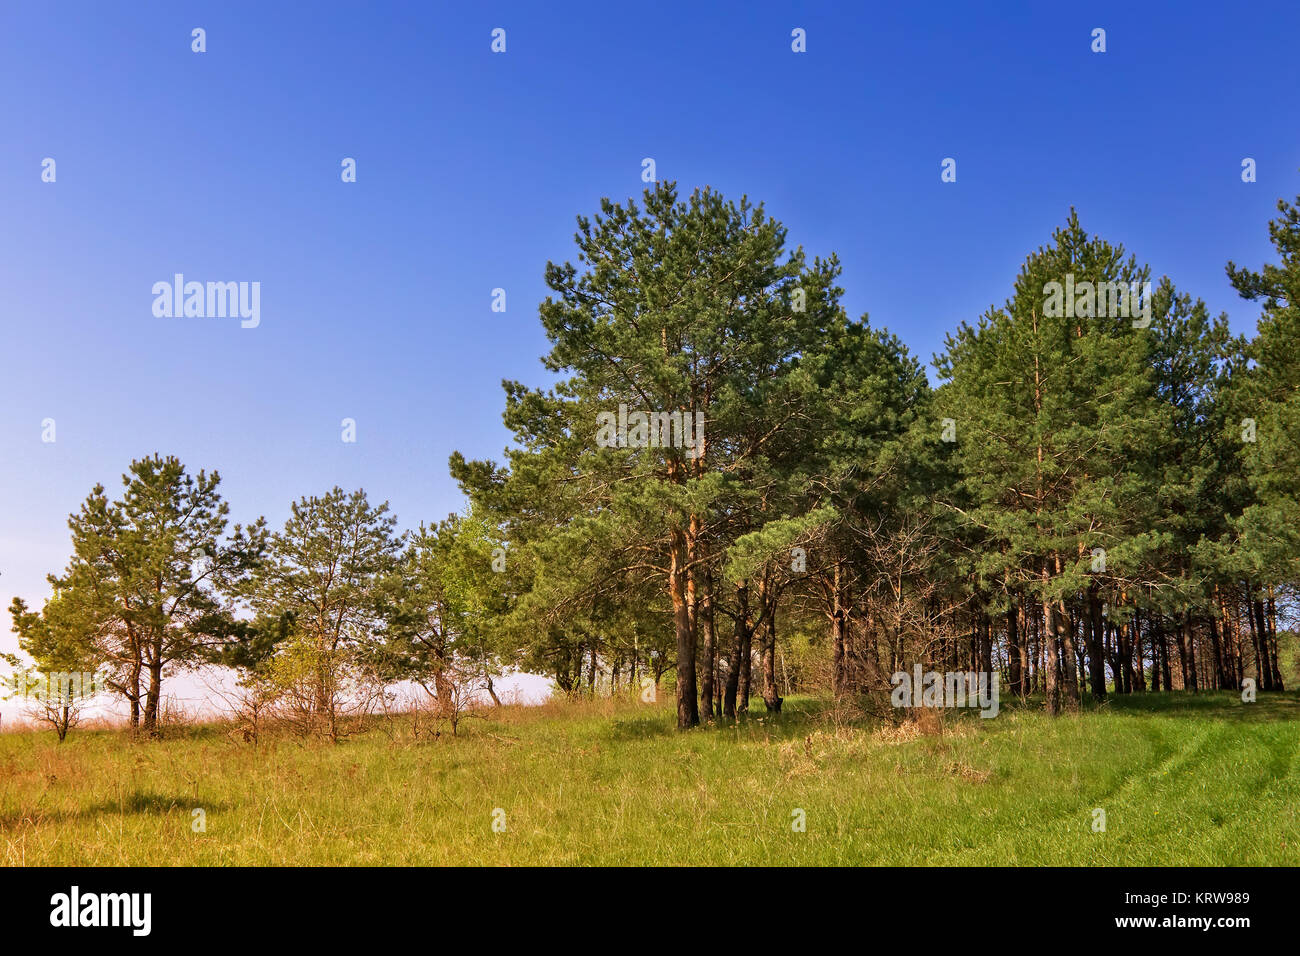 Spring landscape in the forest at the edge of a growing young pines. Stock Photo